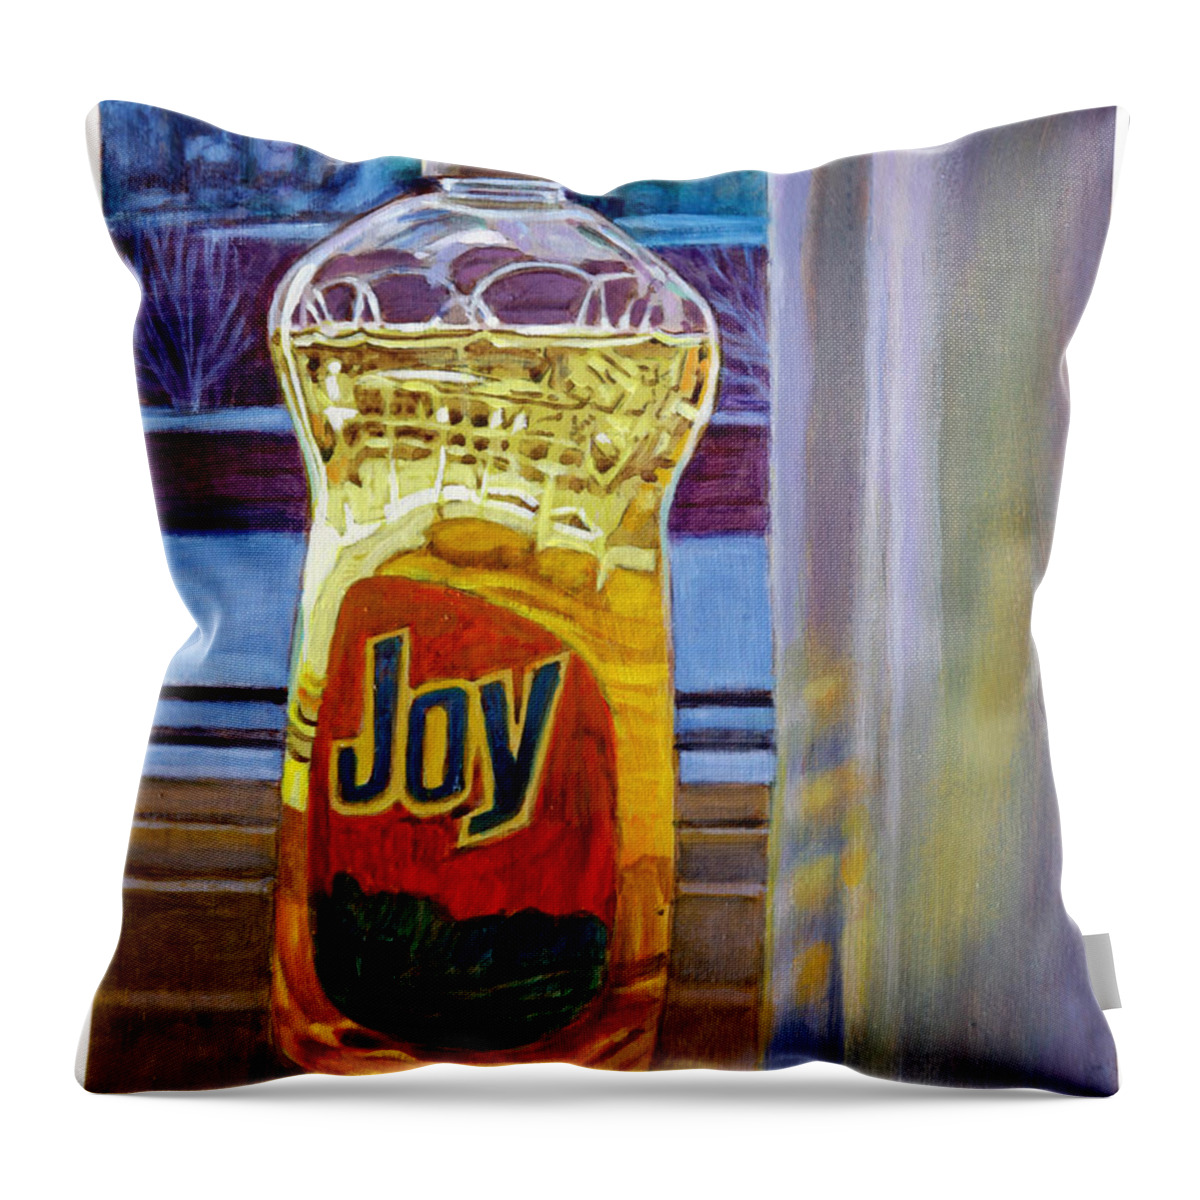 Still Life Throw Pillow featuring the painting Joy by John Lautermilch